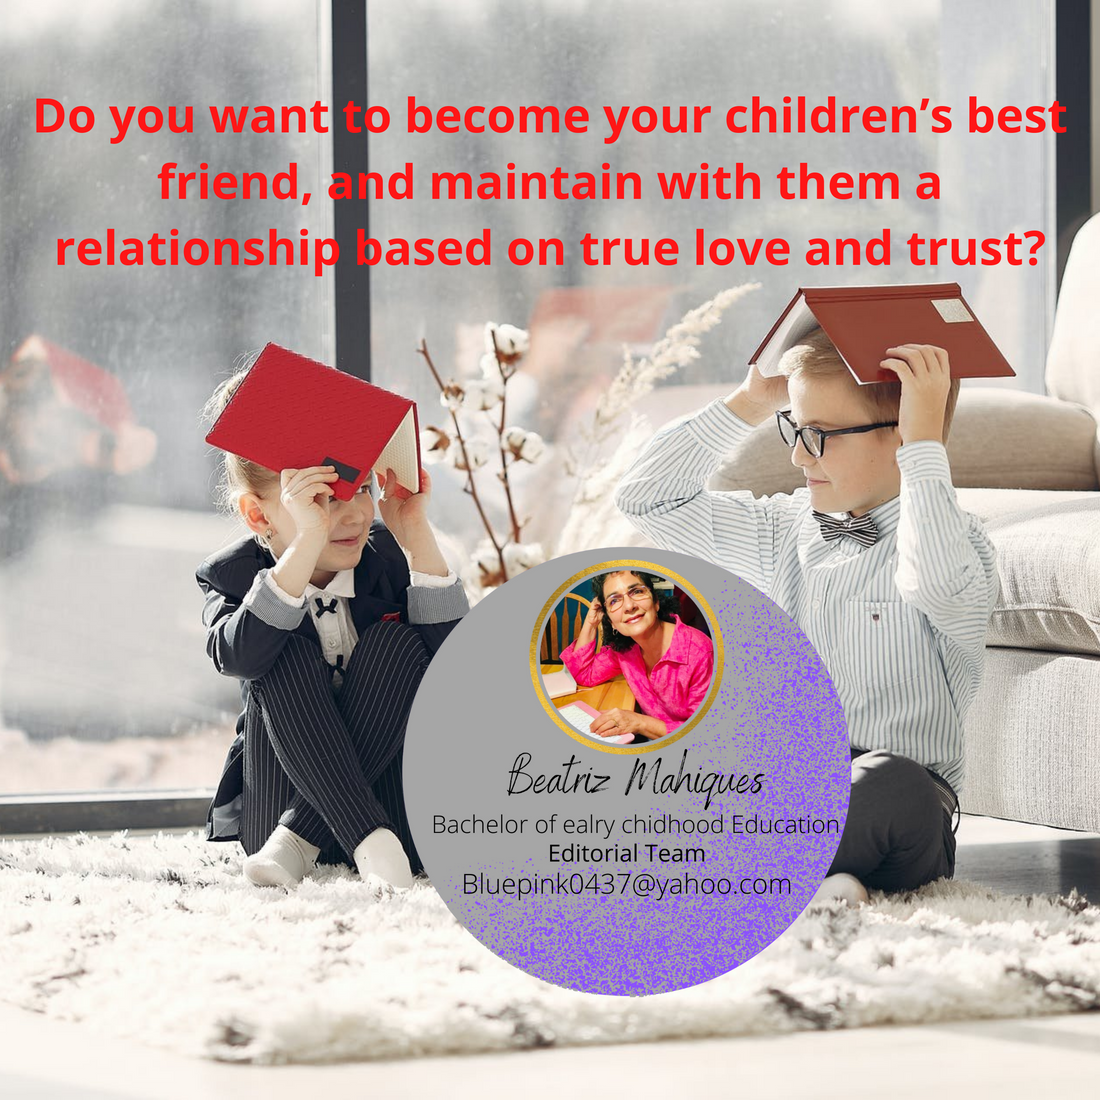 Do you want to become your children’s best friend, and maintain with them a relationship based on true love and trust?